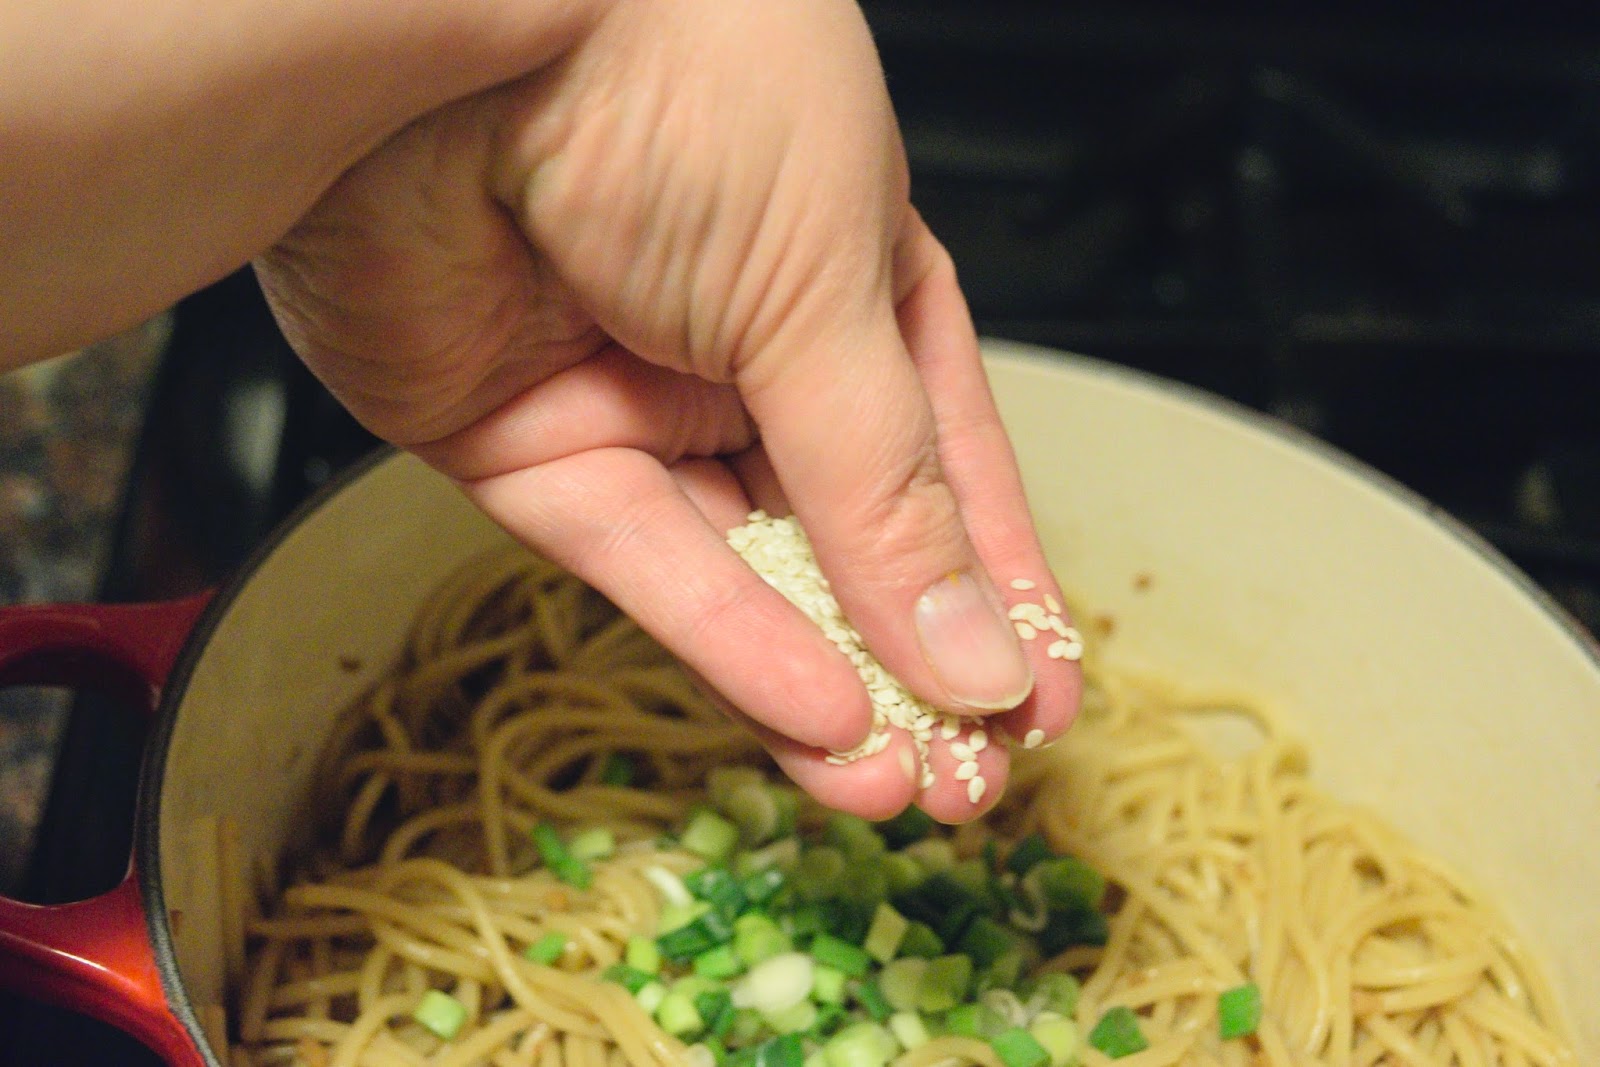 Chopped green onions and sesame seeds being added to the pot with the noodles.